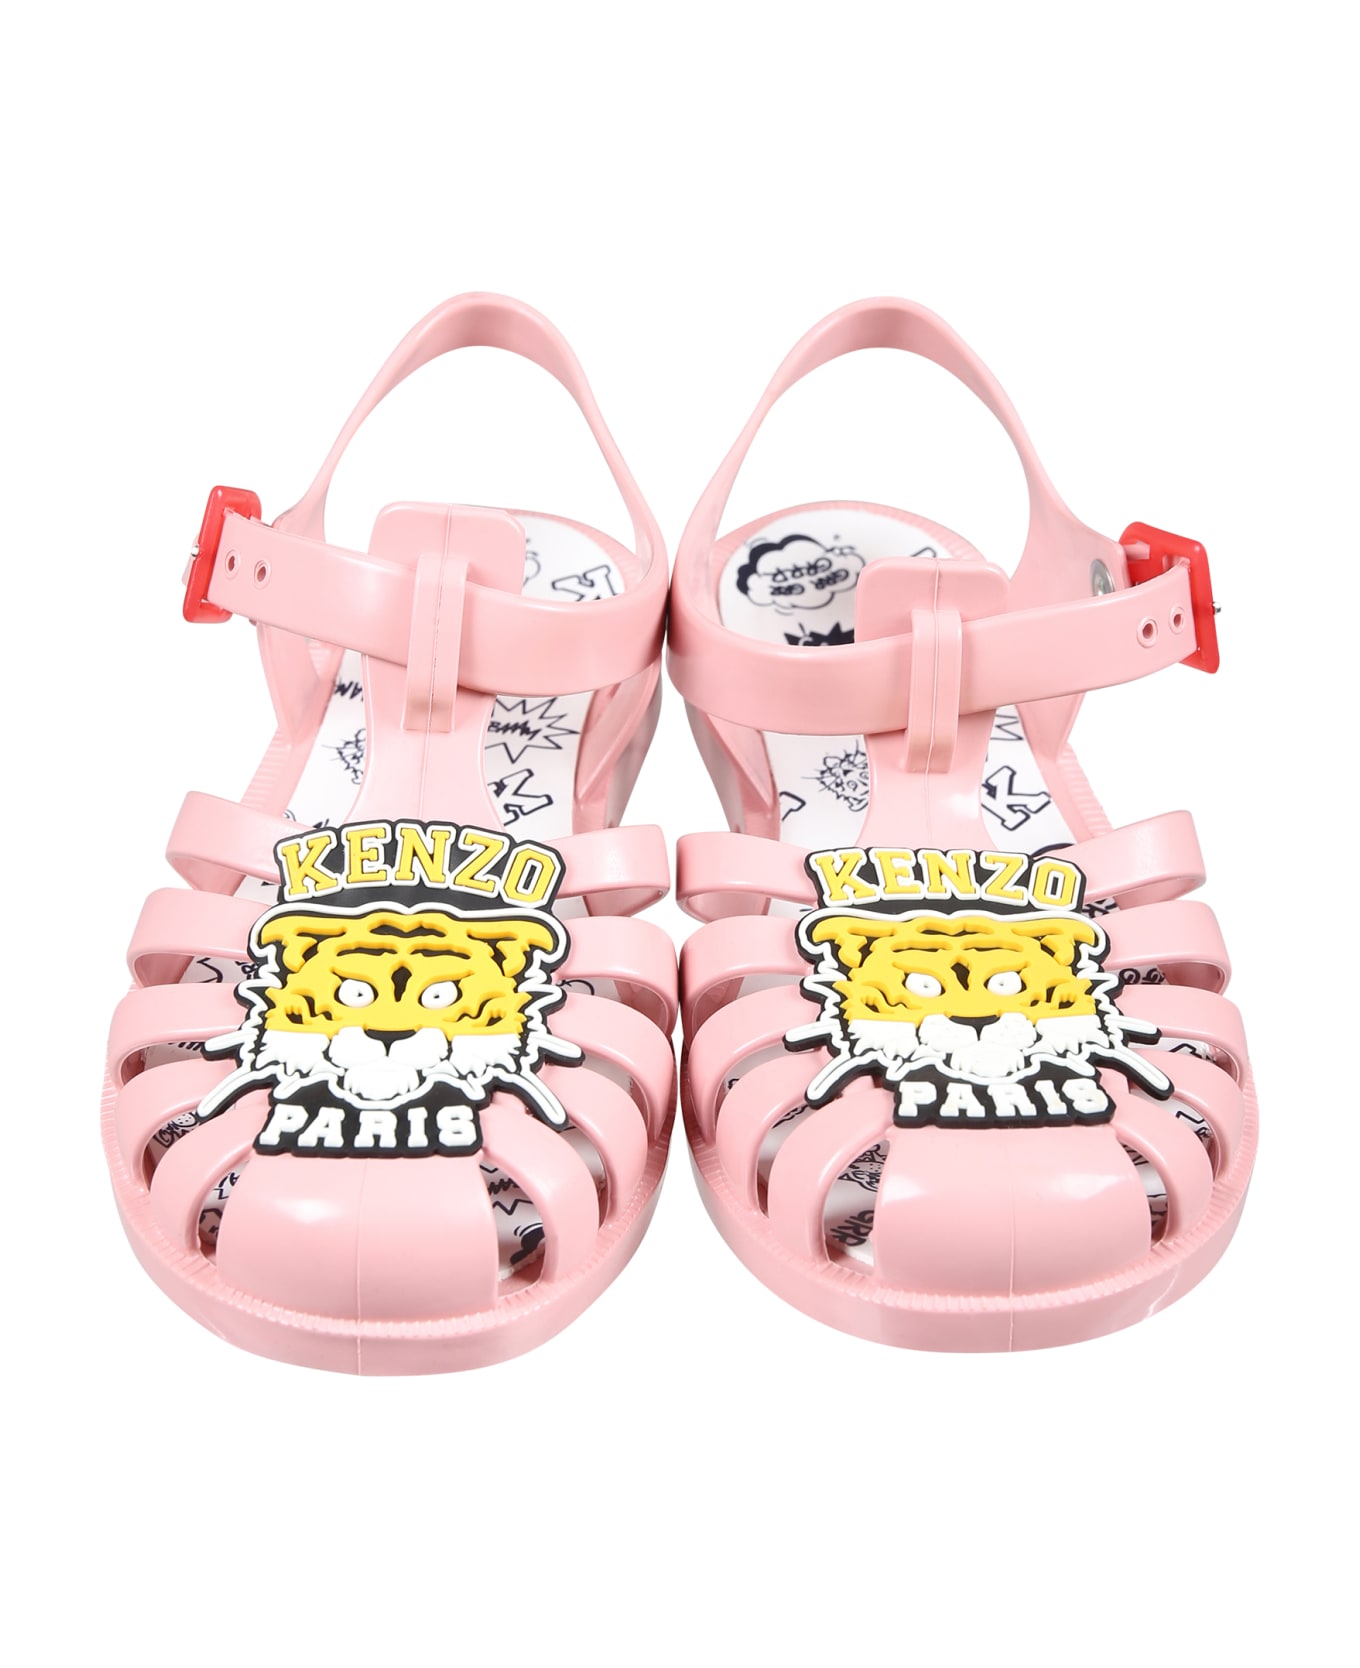 Kenzo Kids Pink Sandals For Girl With Tiger - Rosa